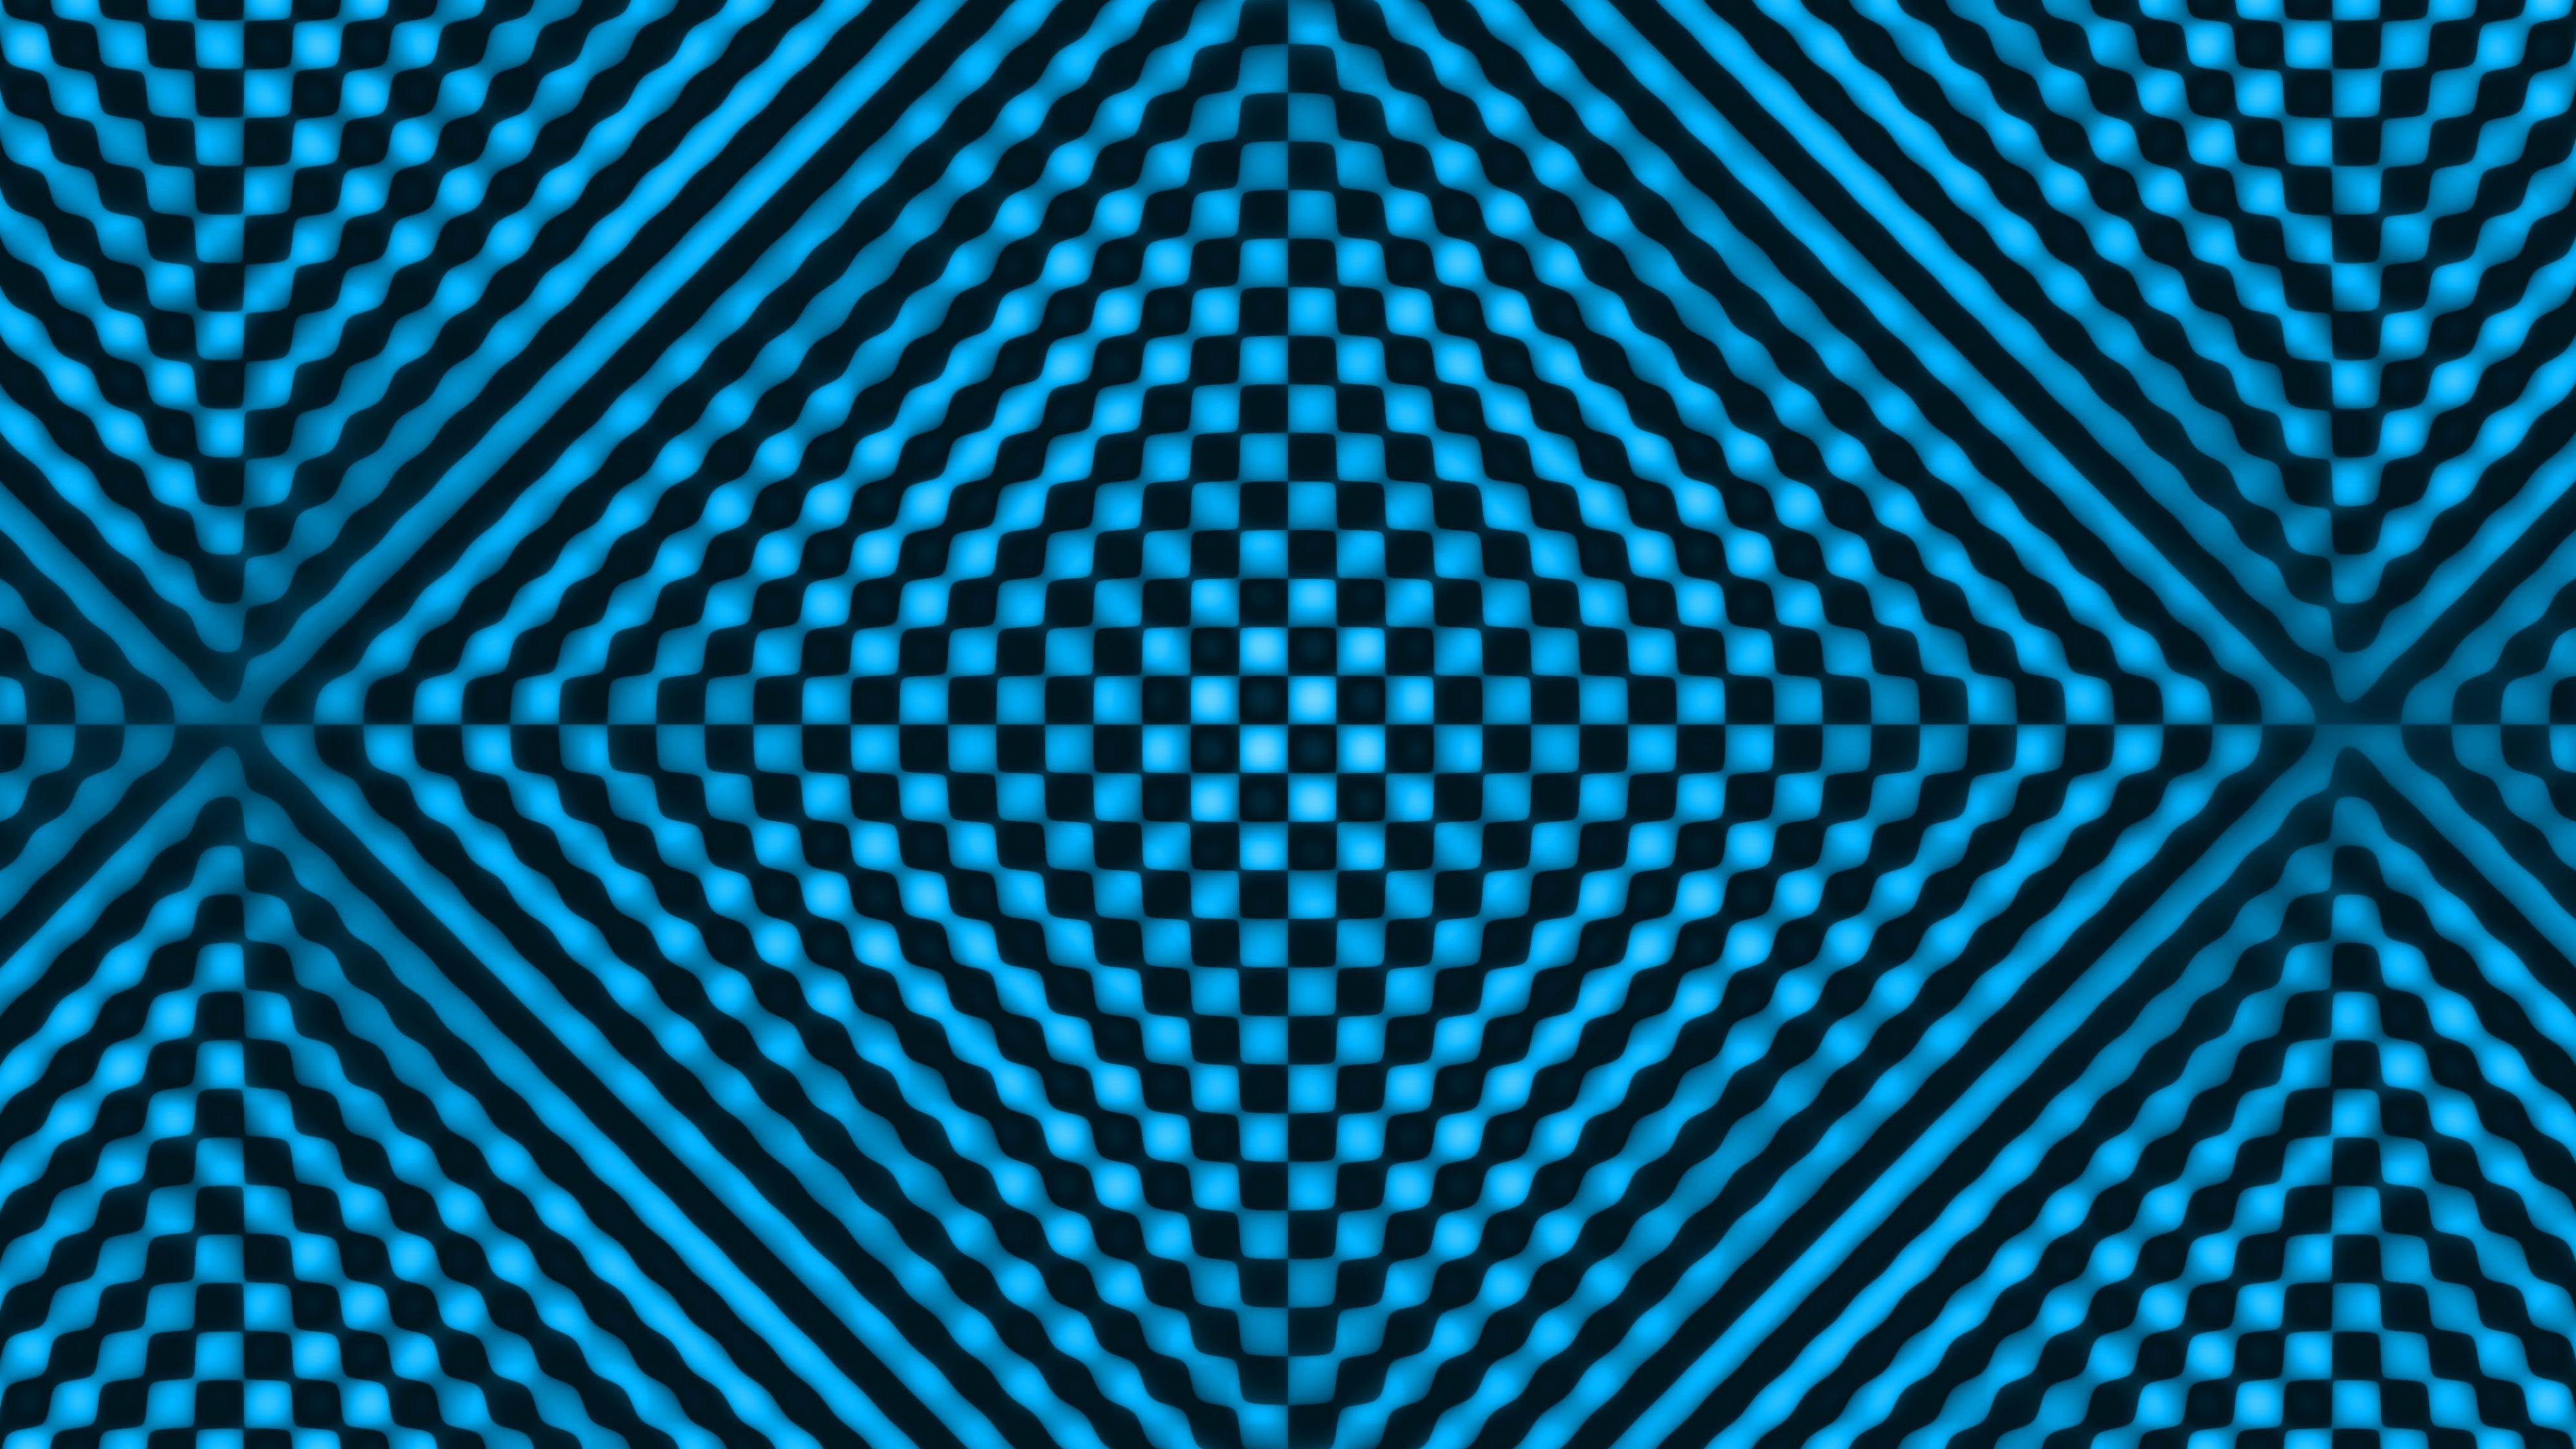 General 3840x2160 blue background abstract optical illusion digital art square symmetry cyan